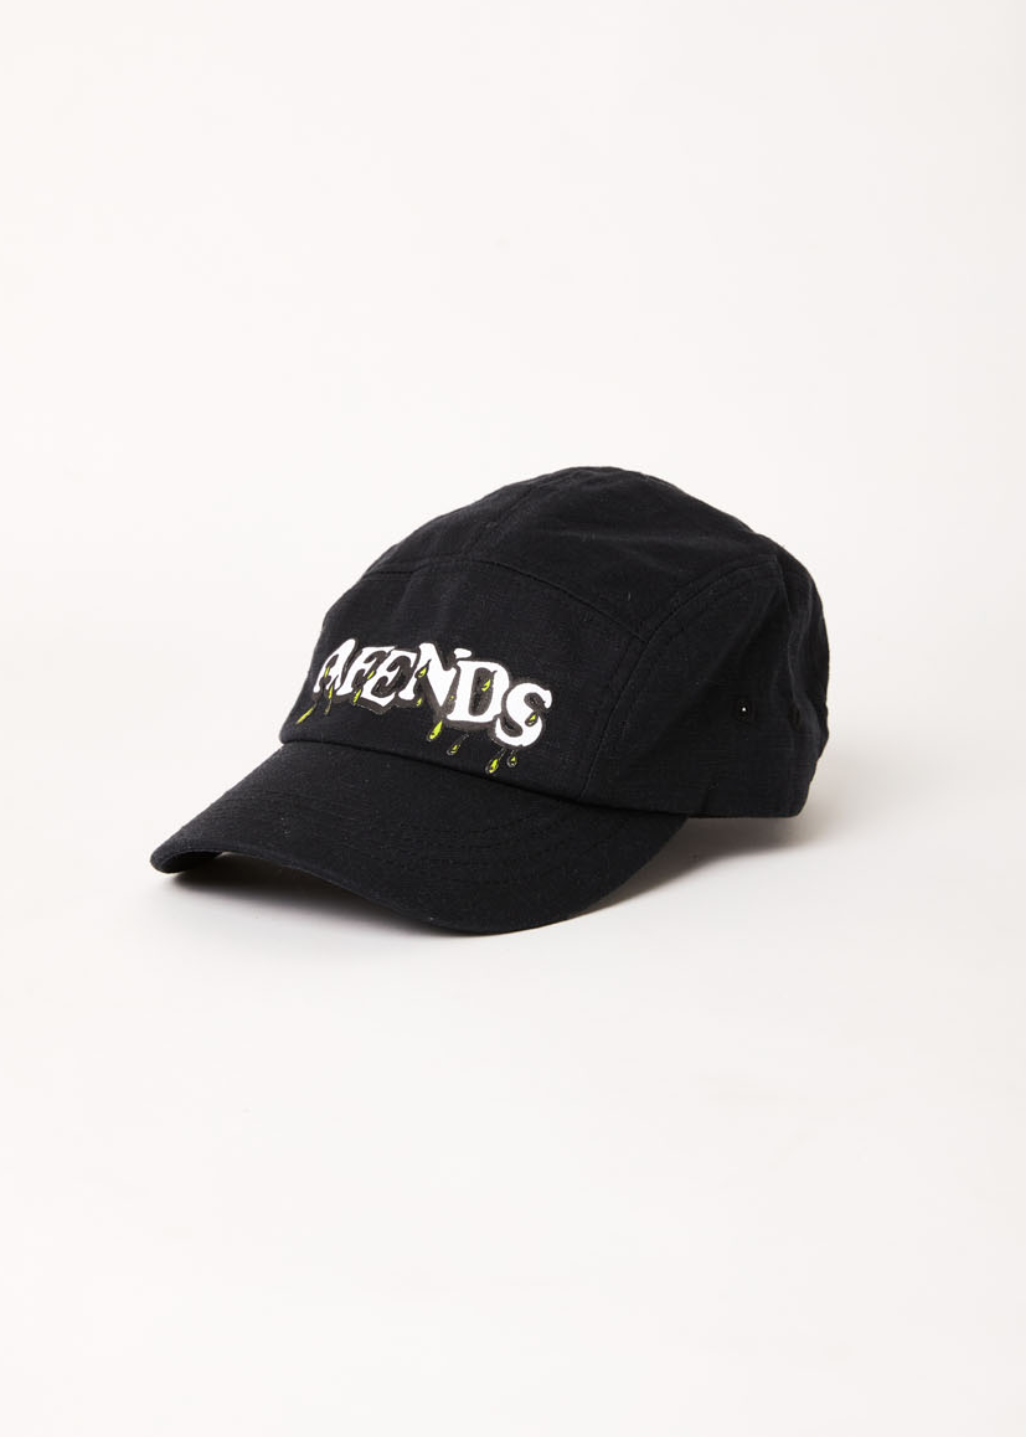 AFENDS キャップ